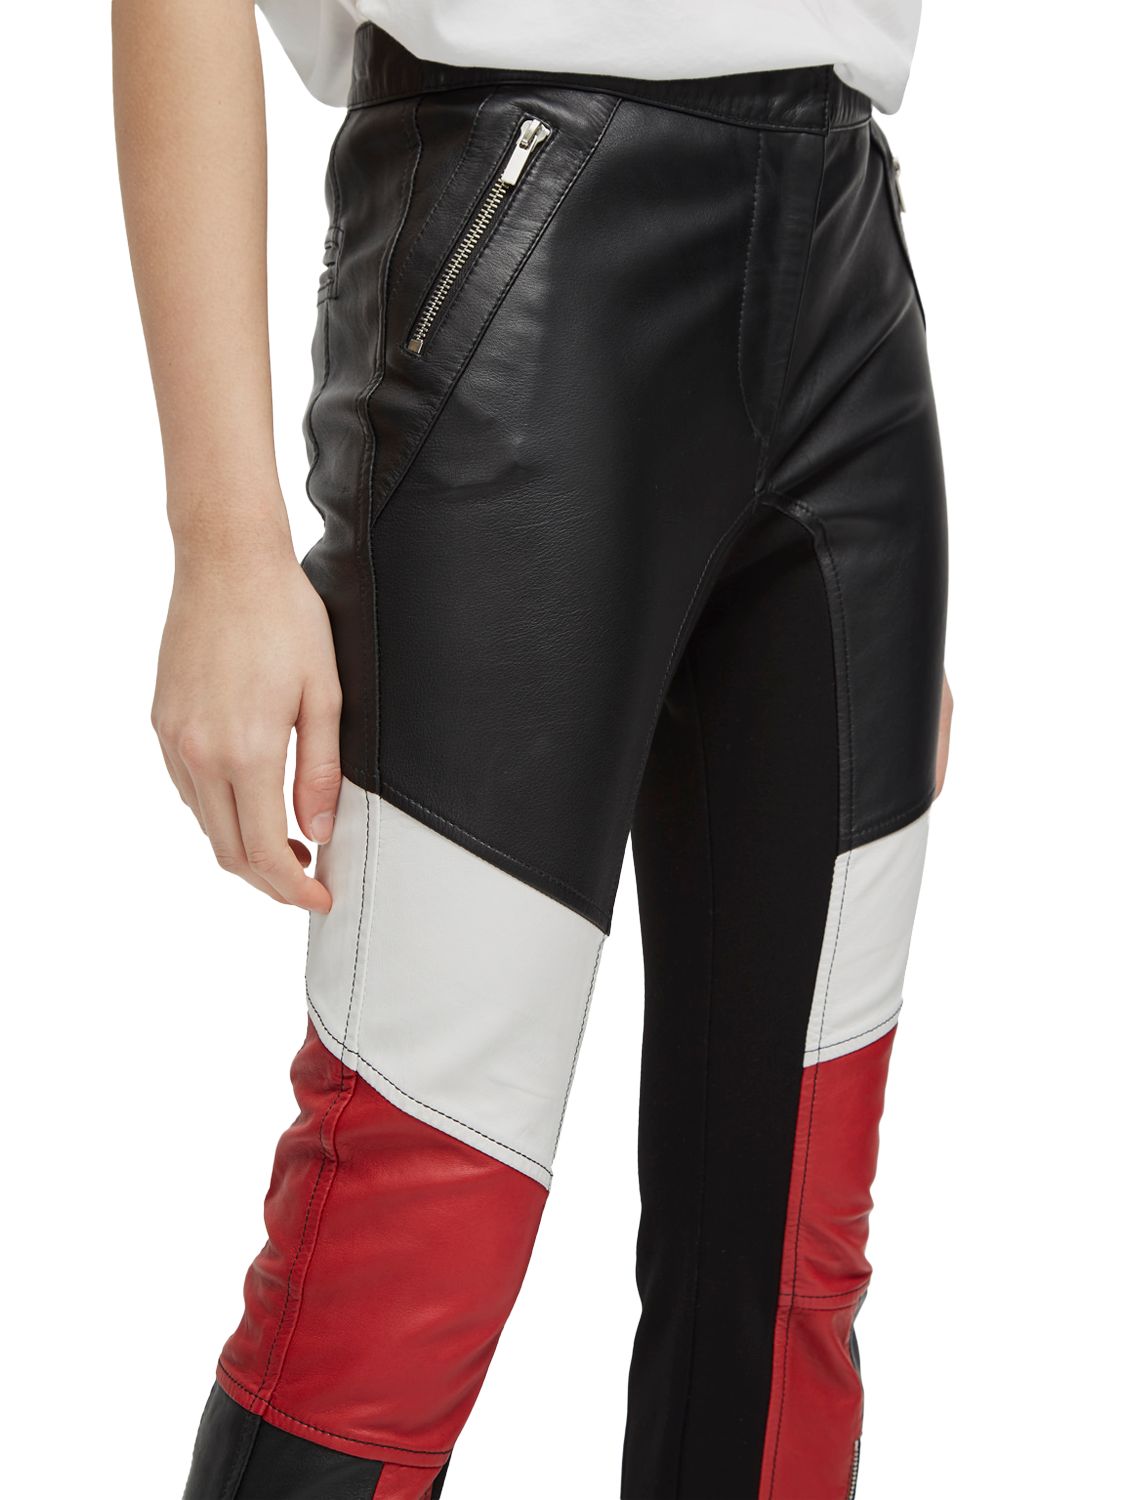 off white leather pants